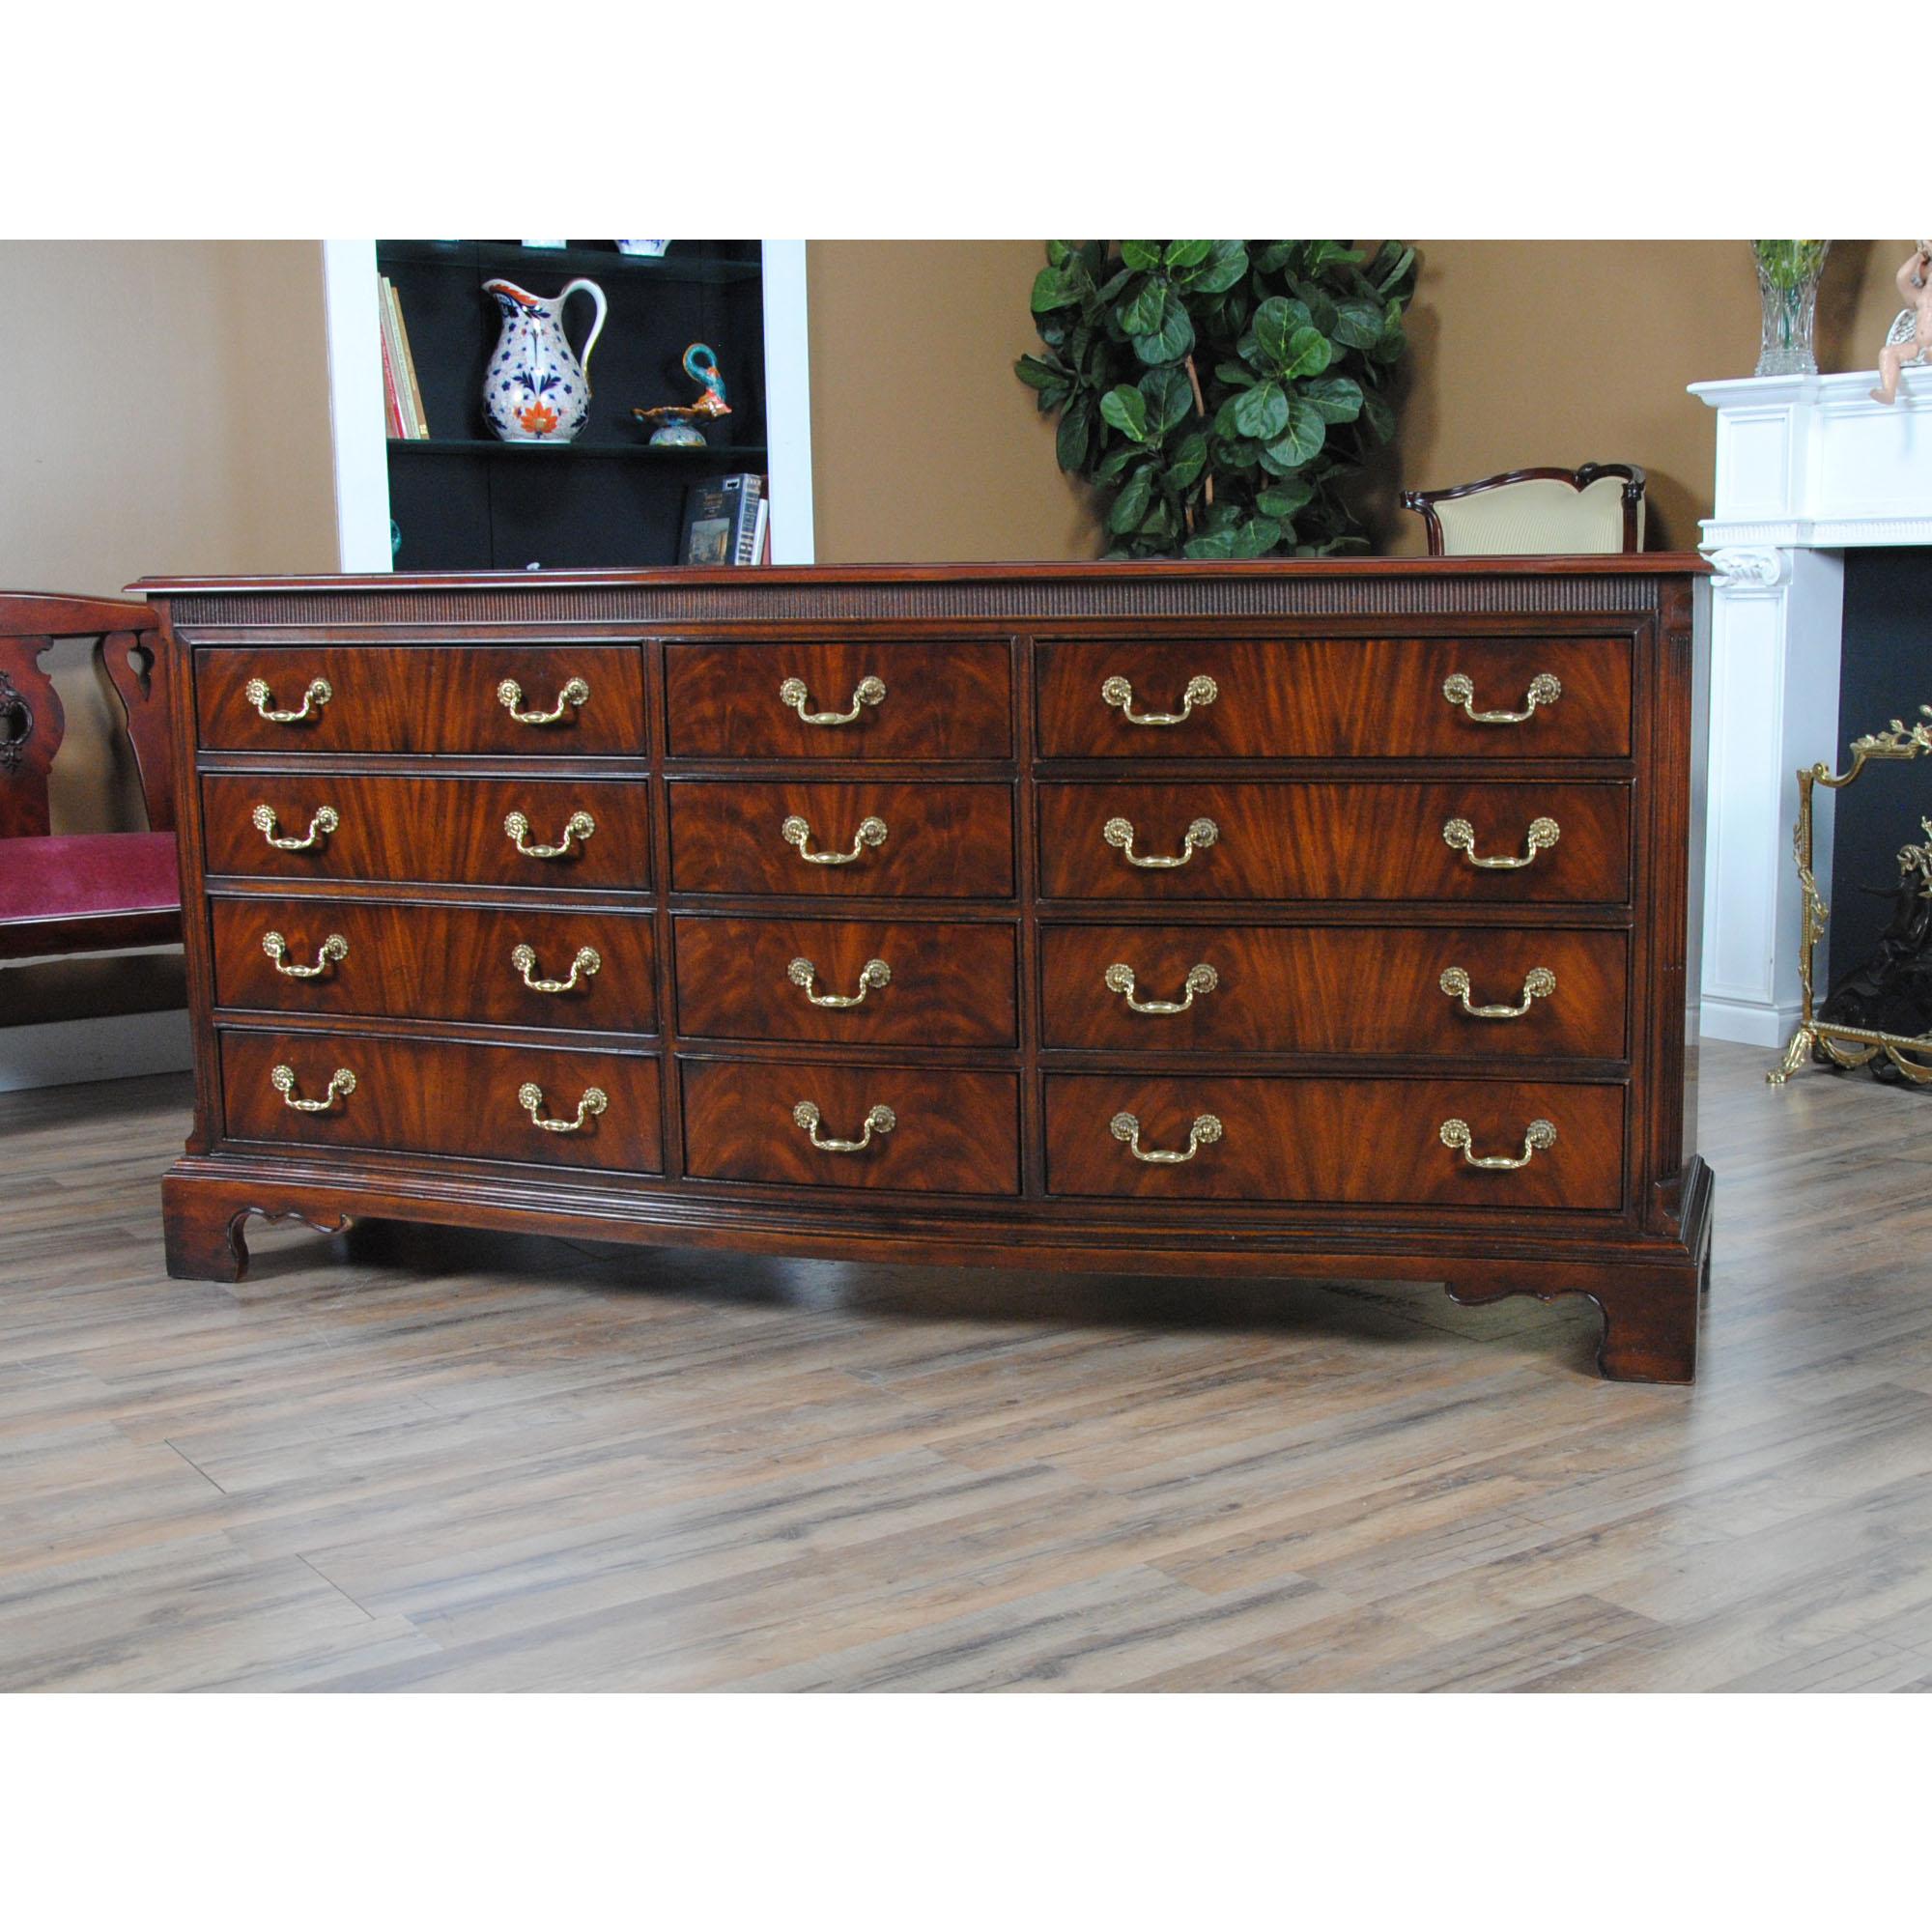 A Vintage Drexel Mahogany Triple Dresser. A classic furniture shape this serpentine chest features three drawers across and four drawers high to give this large dresser an elegant and traditional furniture appearance that is both functional and